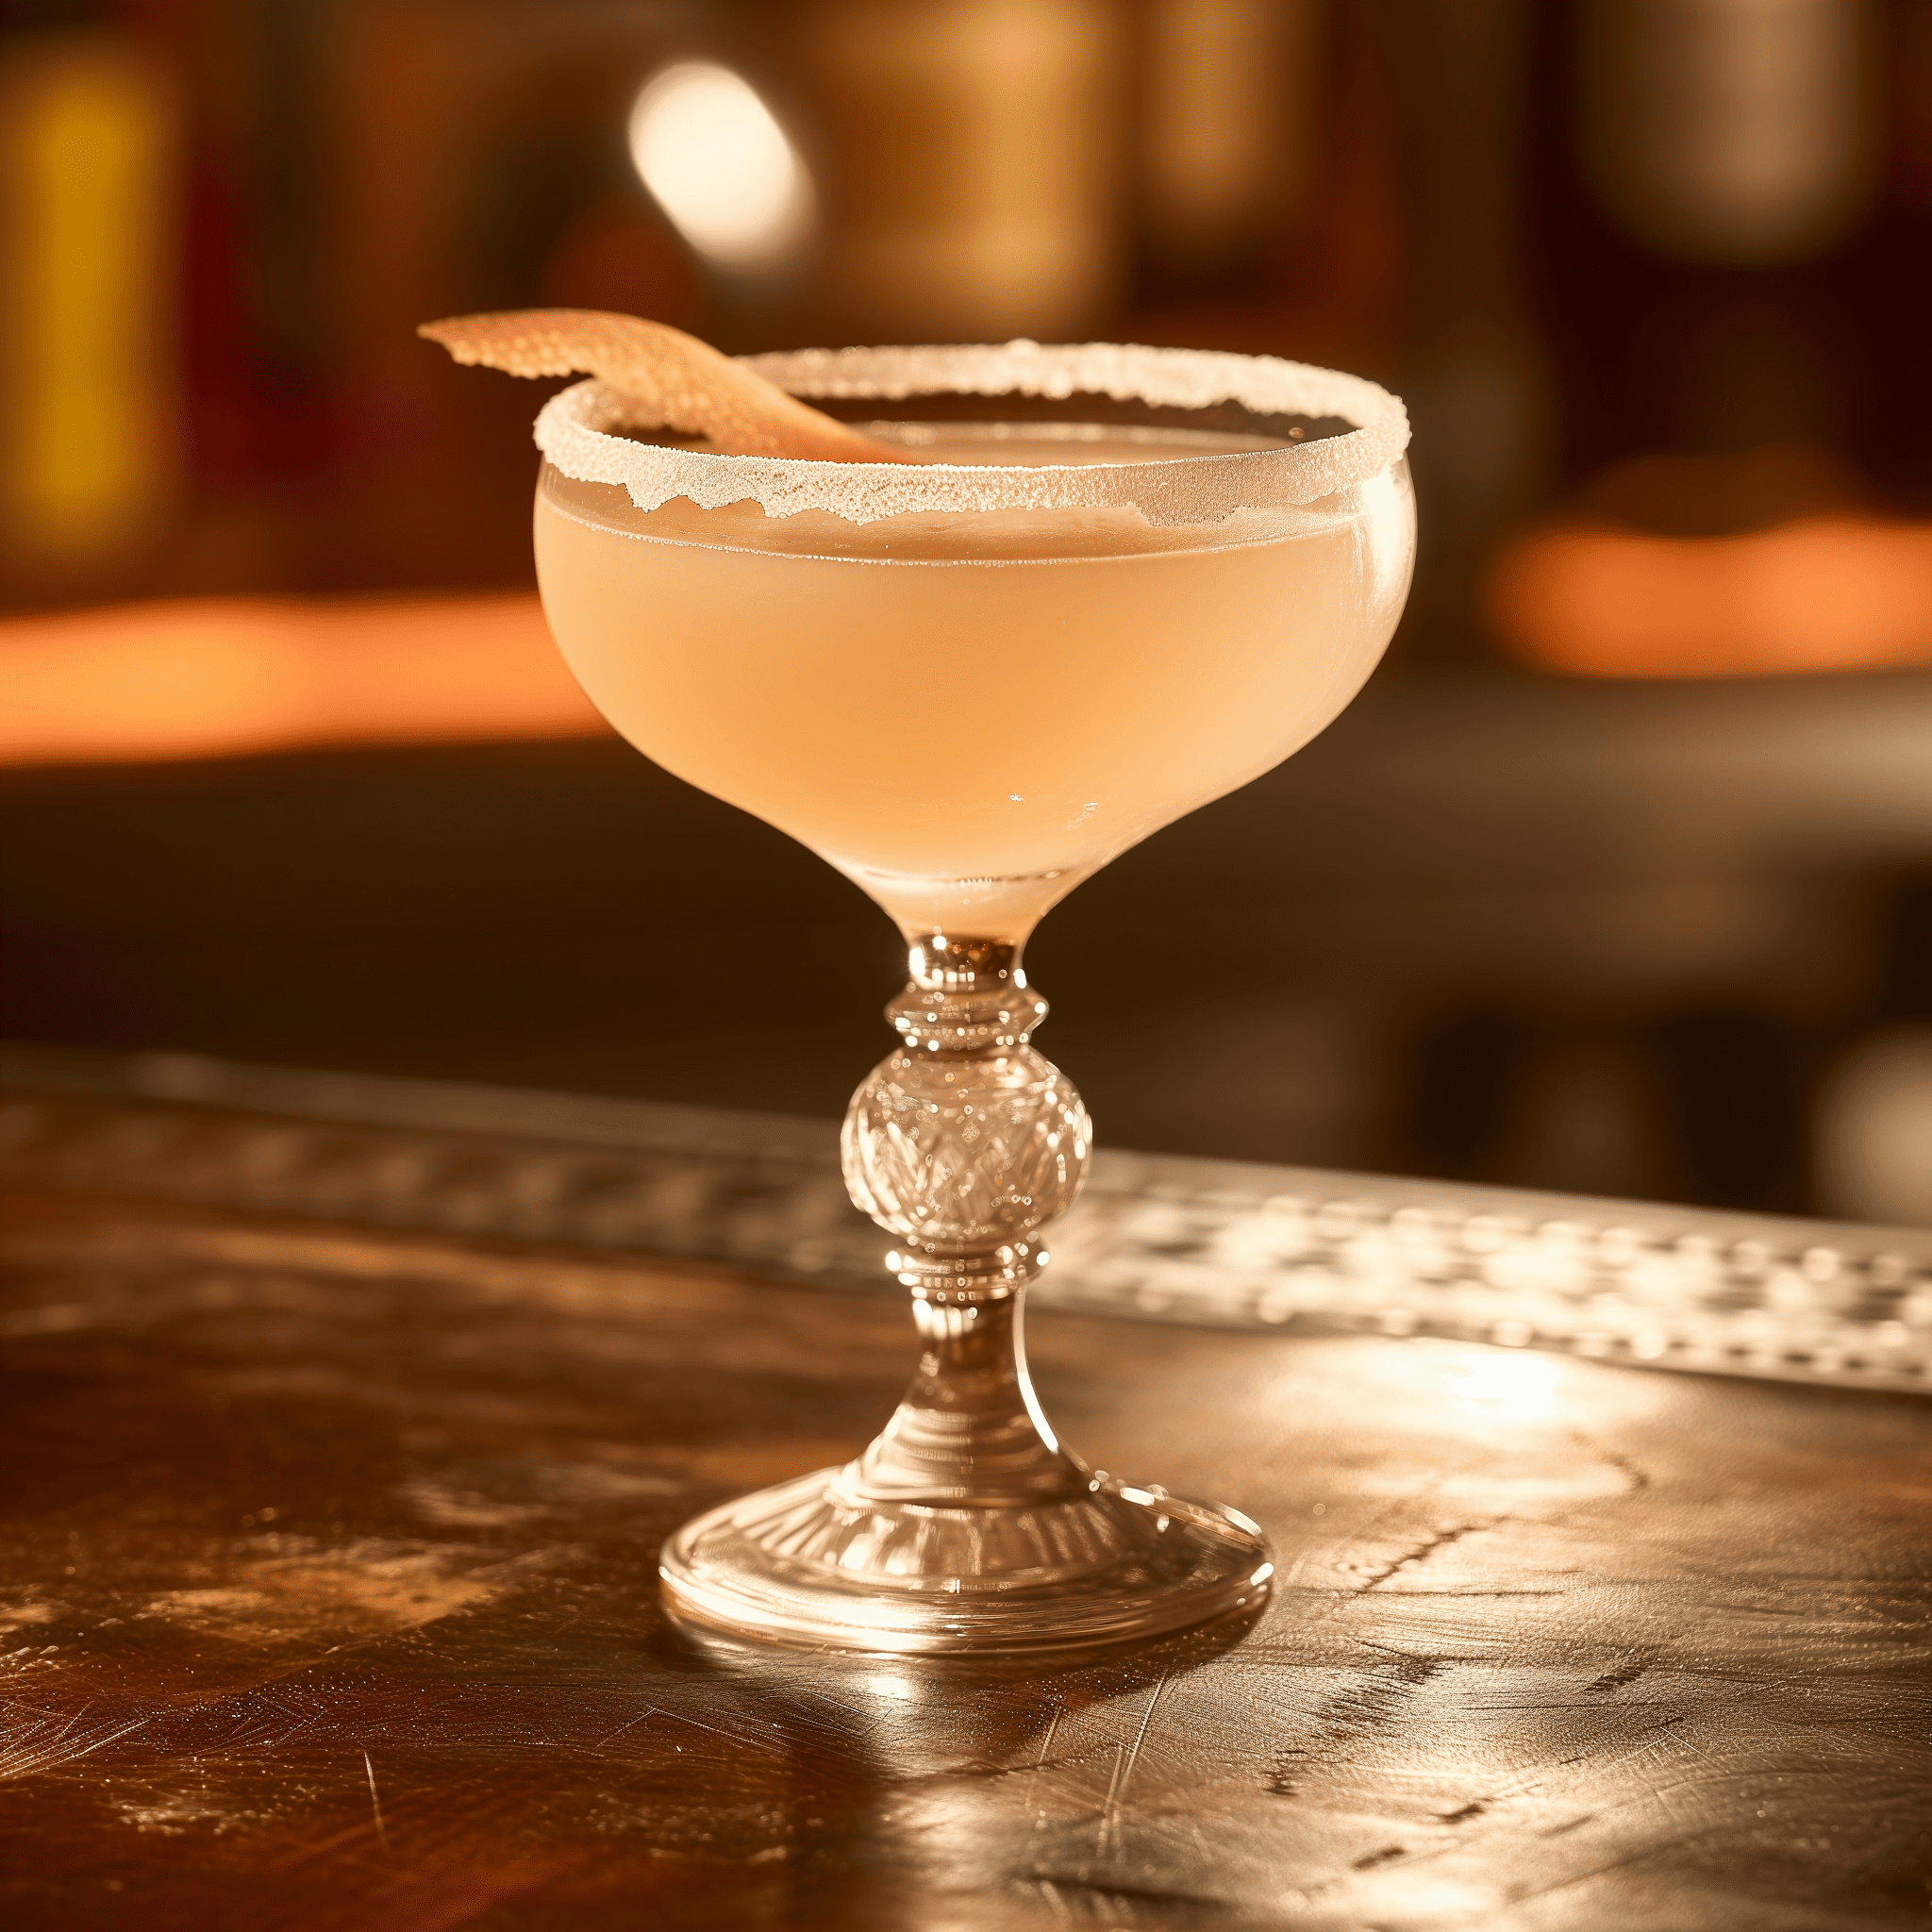 Nevada Daiquiri Cocktail Recipe - The Nevada Daiquiri offers a harmonious blend of sweet and tart flavors, with the grapefruit juice providing a slightly bitter undertone. The rum's warmth is perfectly balanced by the refreshing citrus notes, while the Angostura bitters give it a subtle herbal complexity.